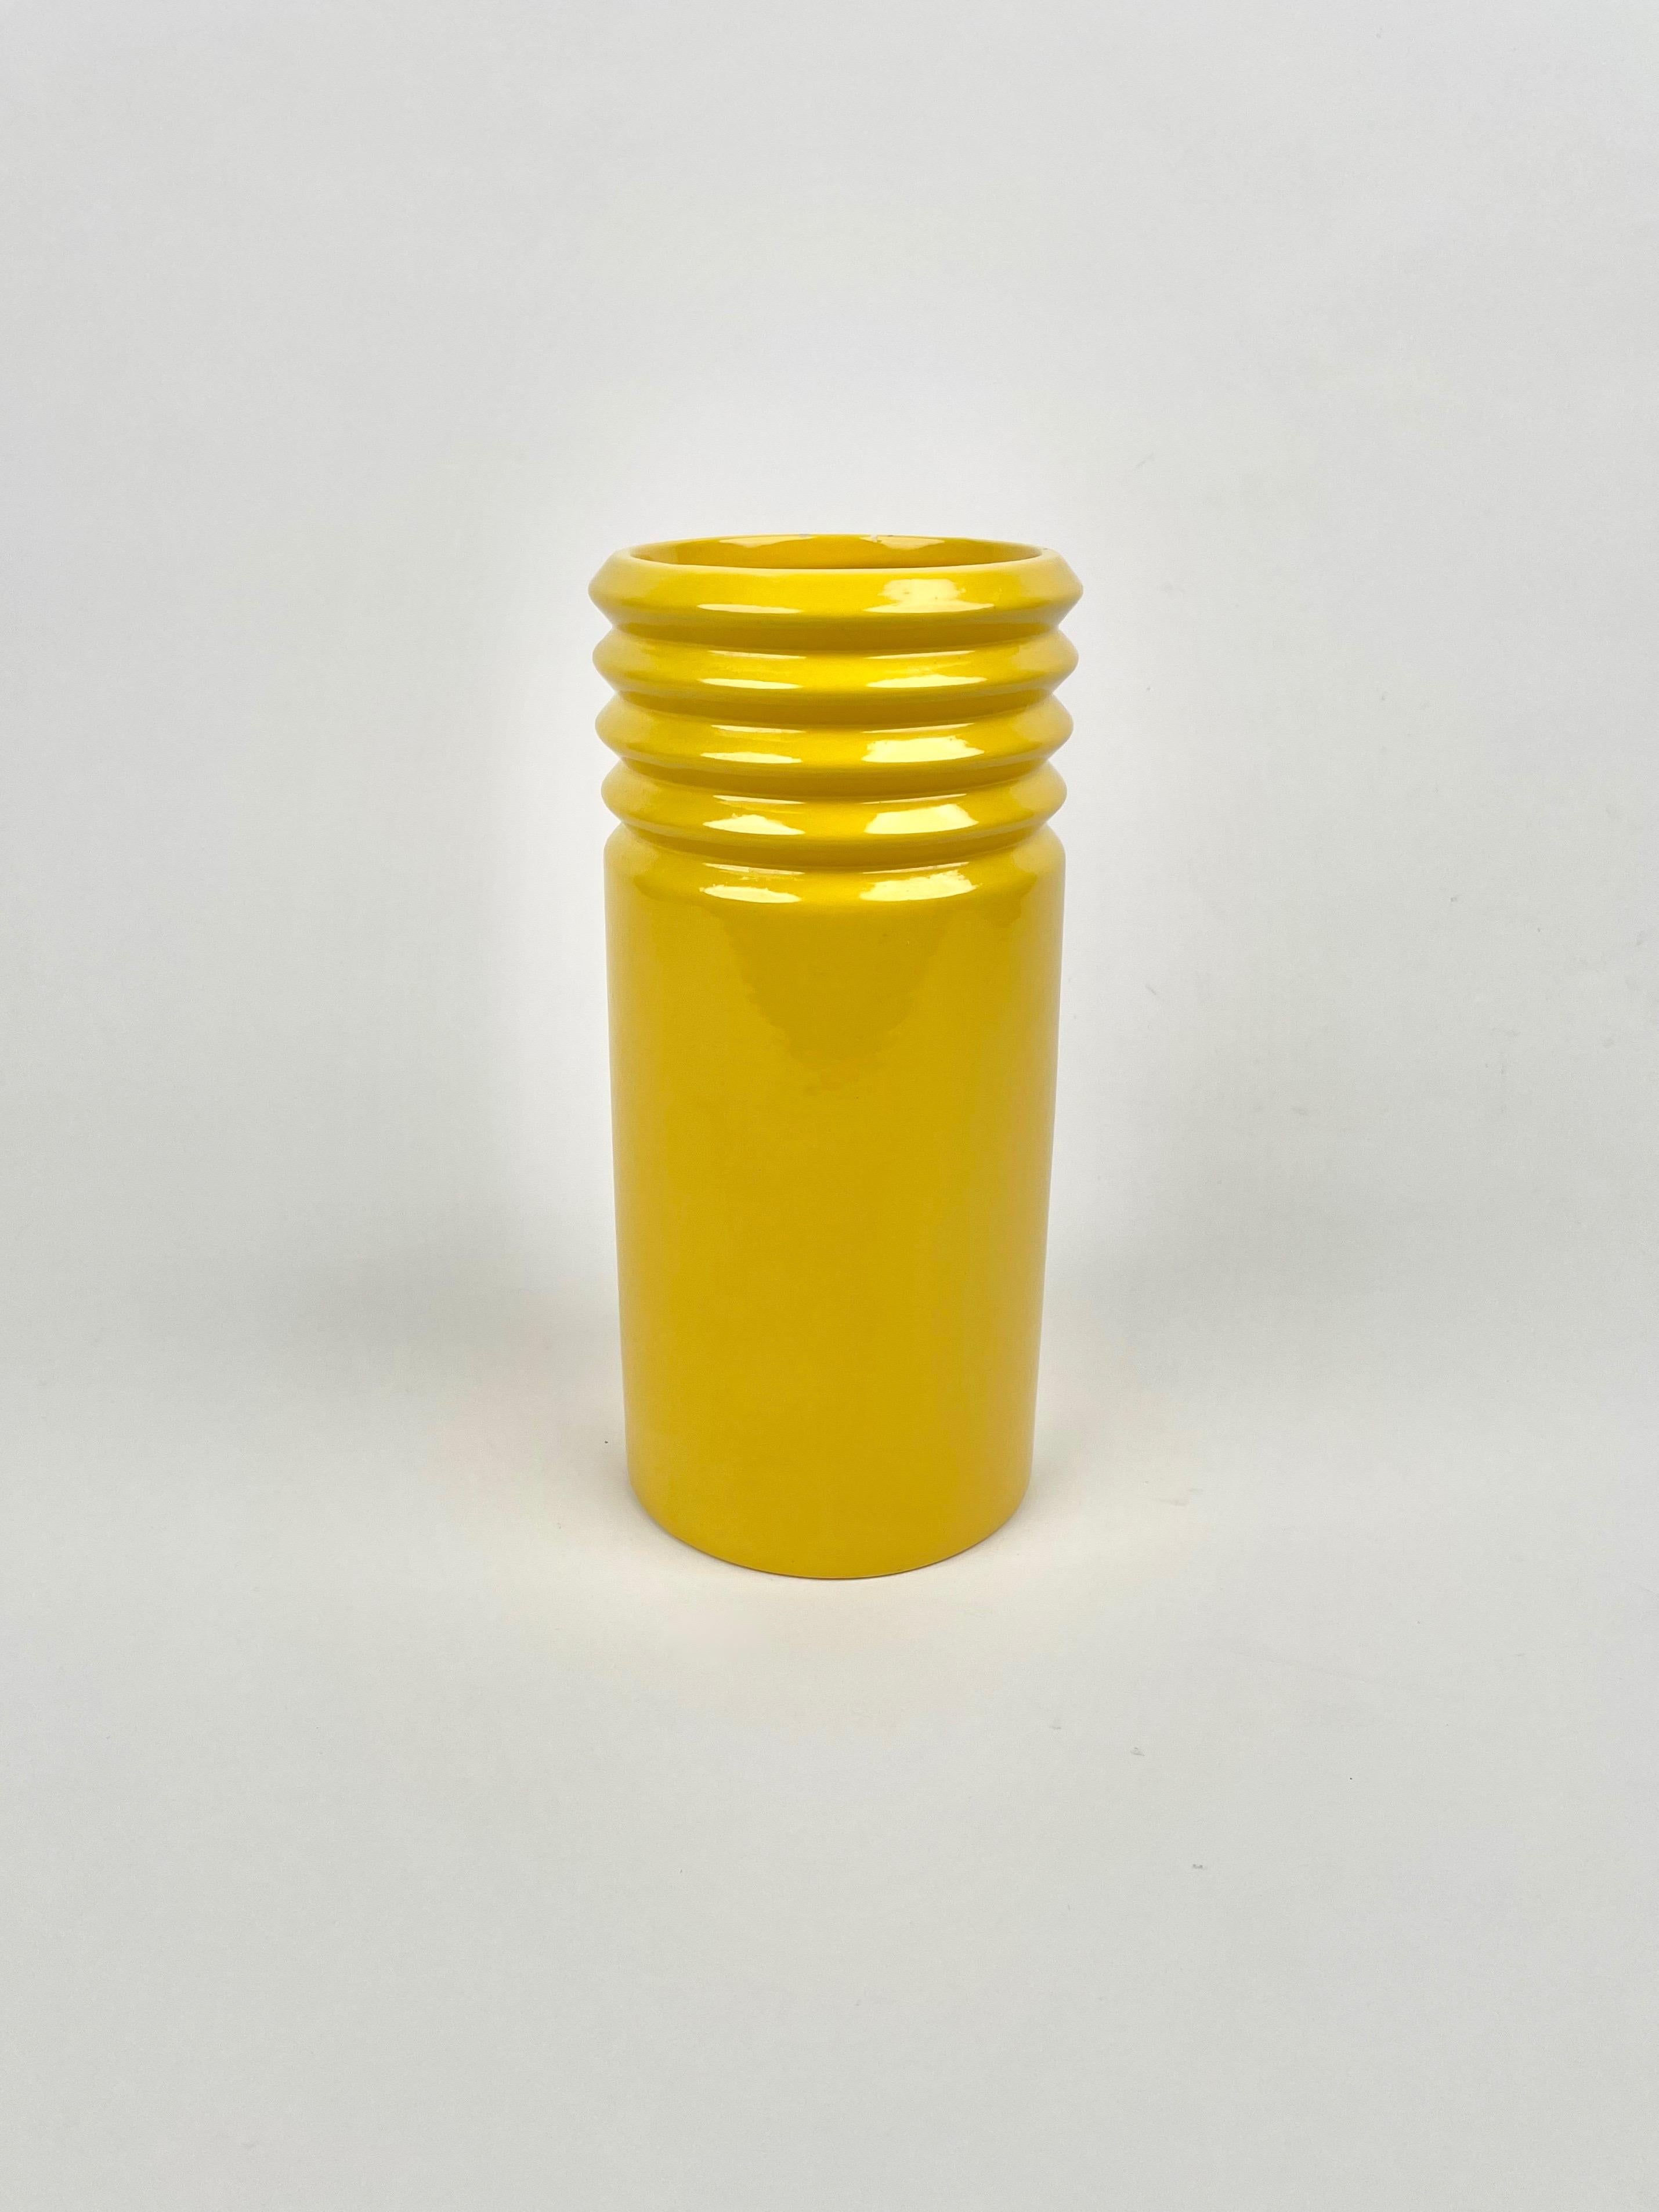 Yellow Ceramic Cylindric Vase by Il Picchio, Italy, 1960s For Sale 1